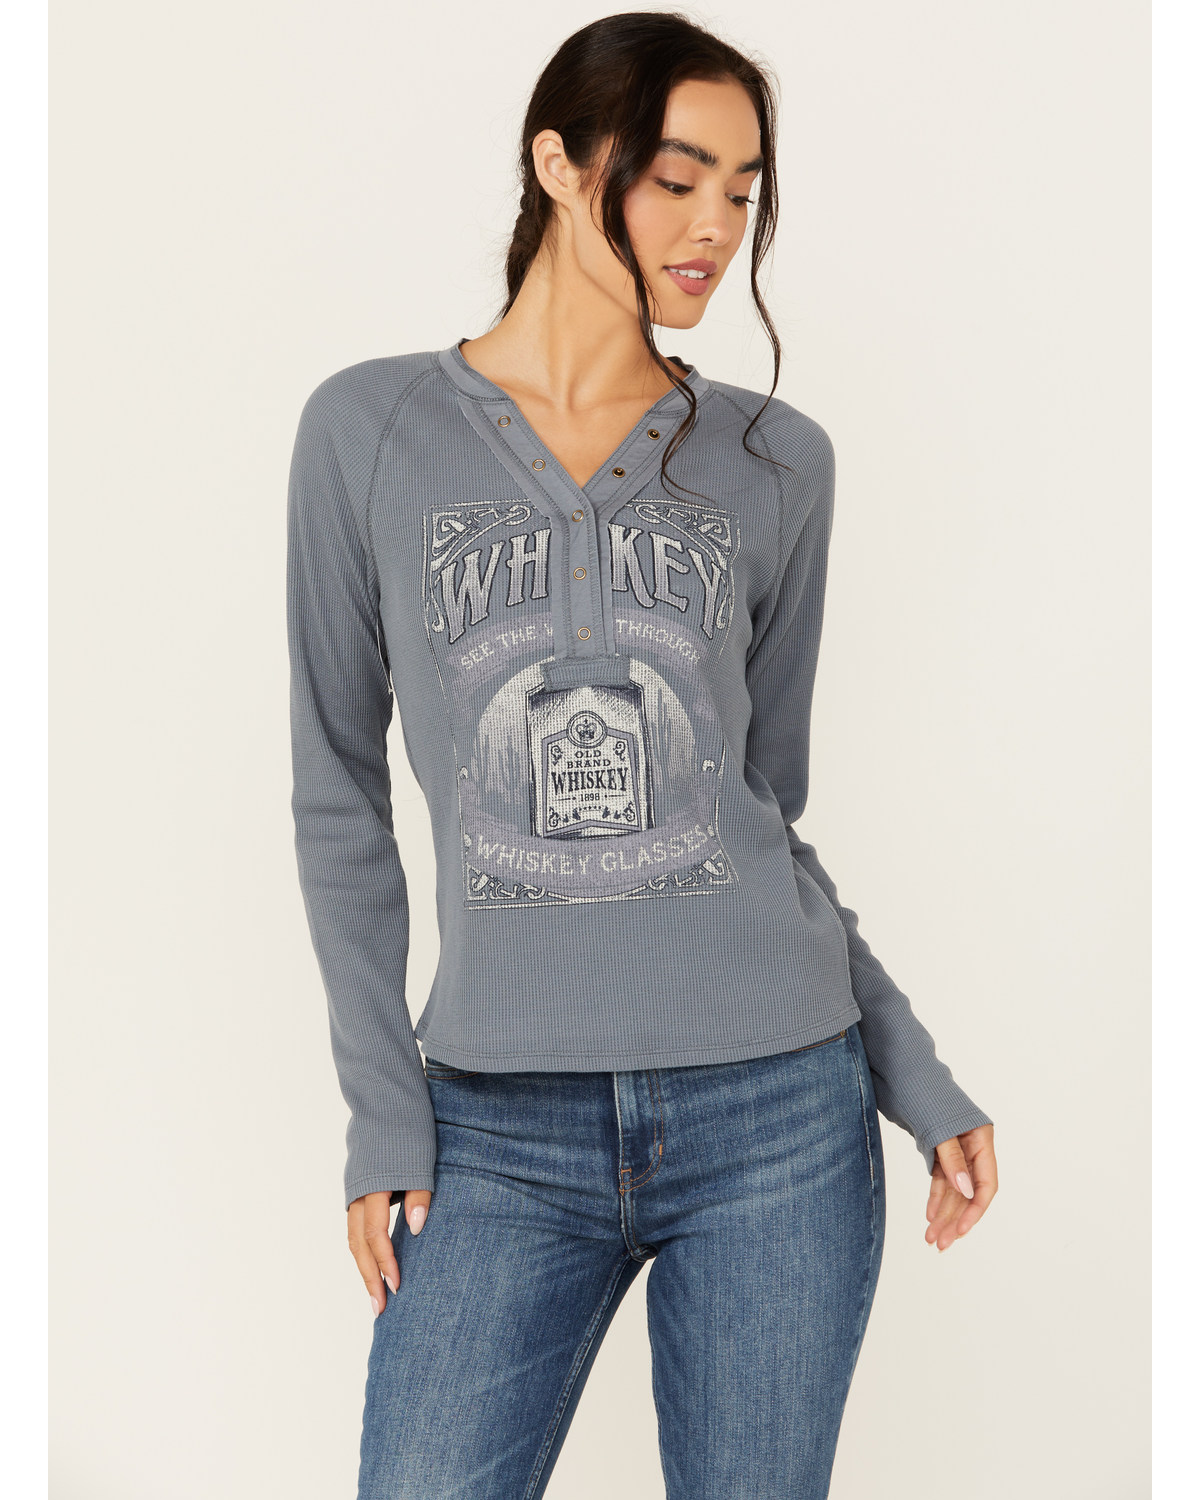 Cleo + Wolf Women's Tequila Graphic Long Sleeve Thermal